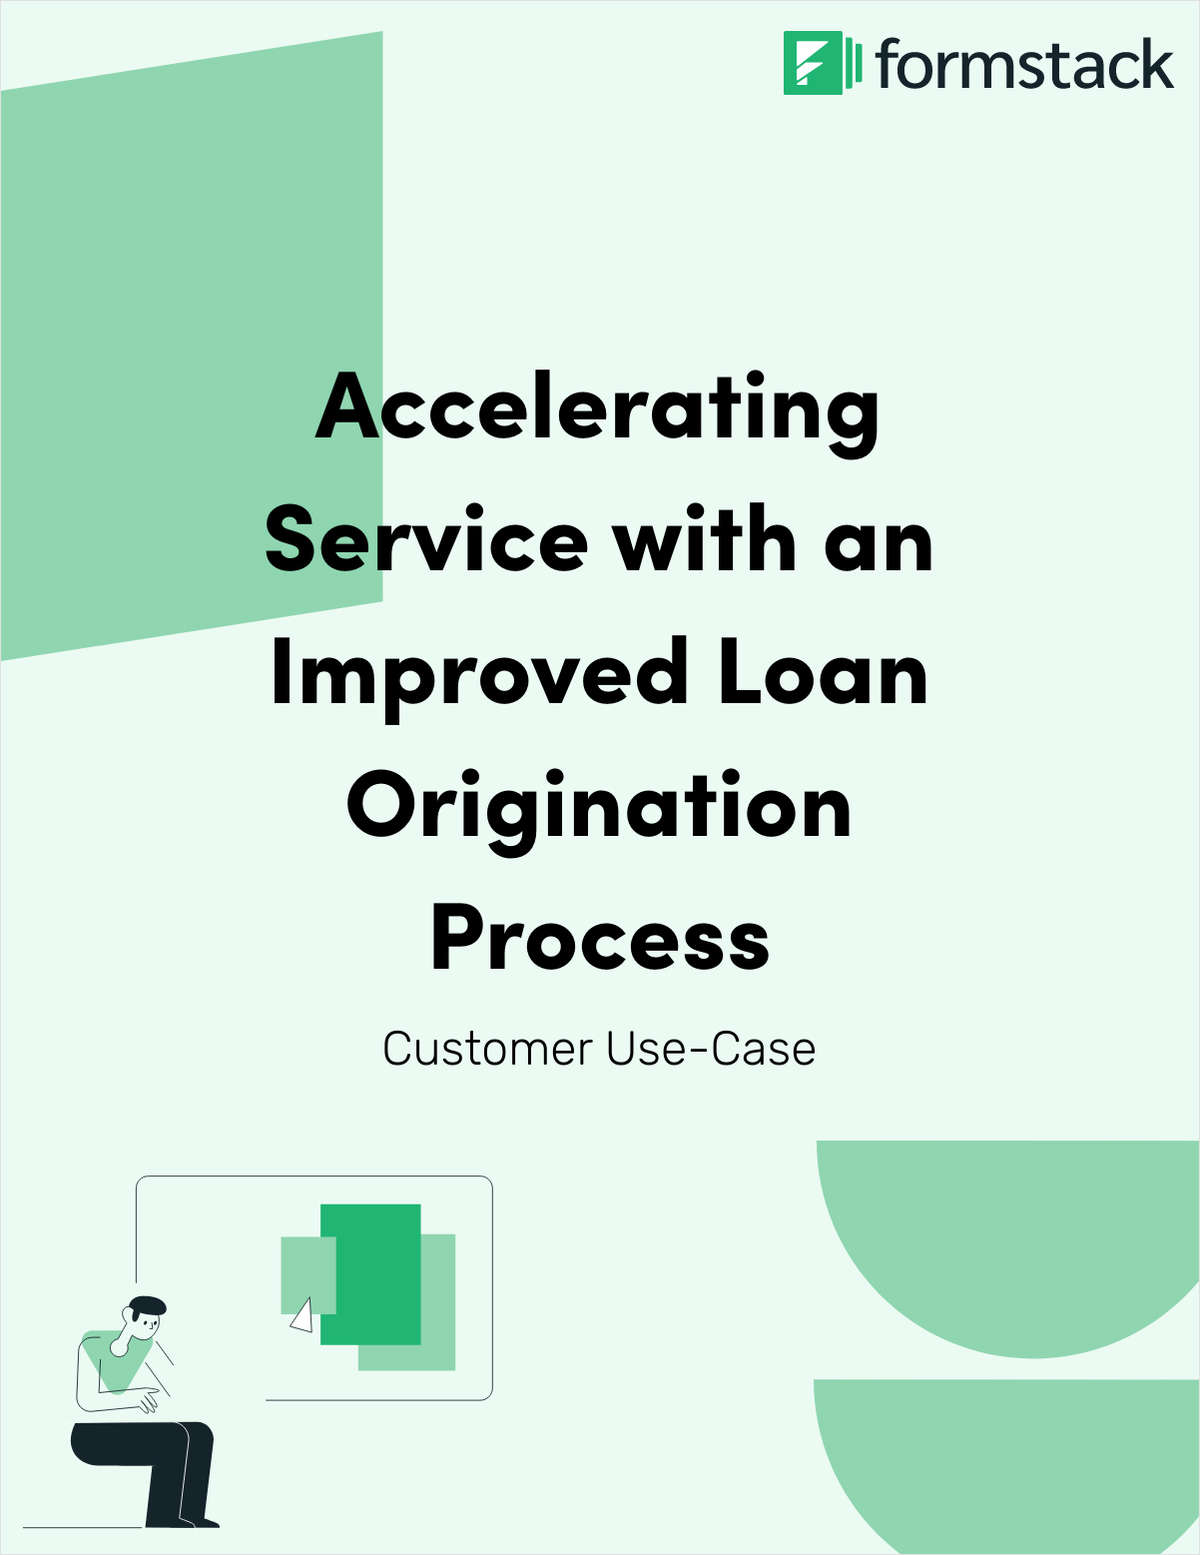 Accelerating Service with an Improved Loan Origination Process